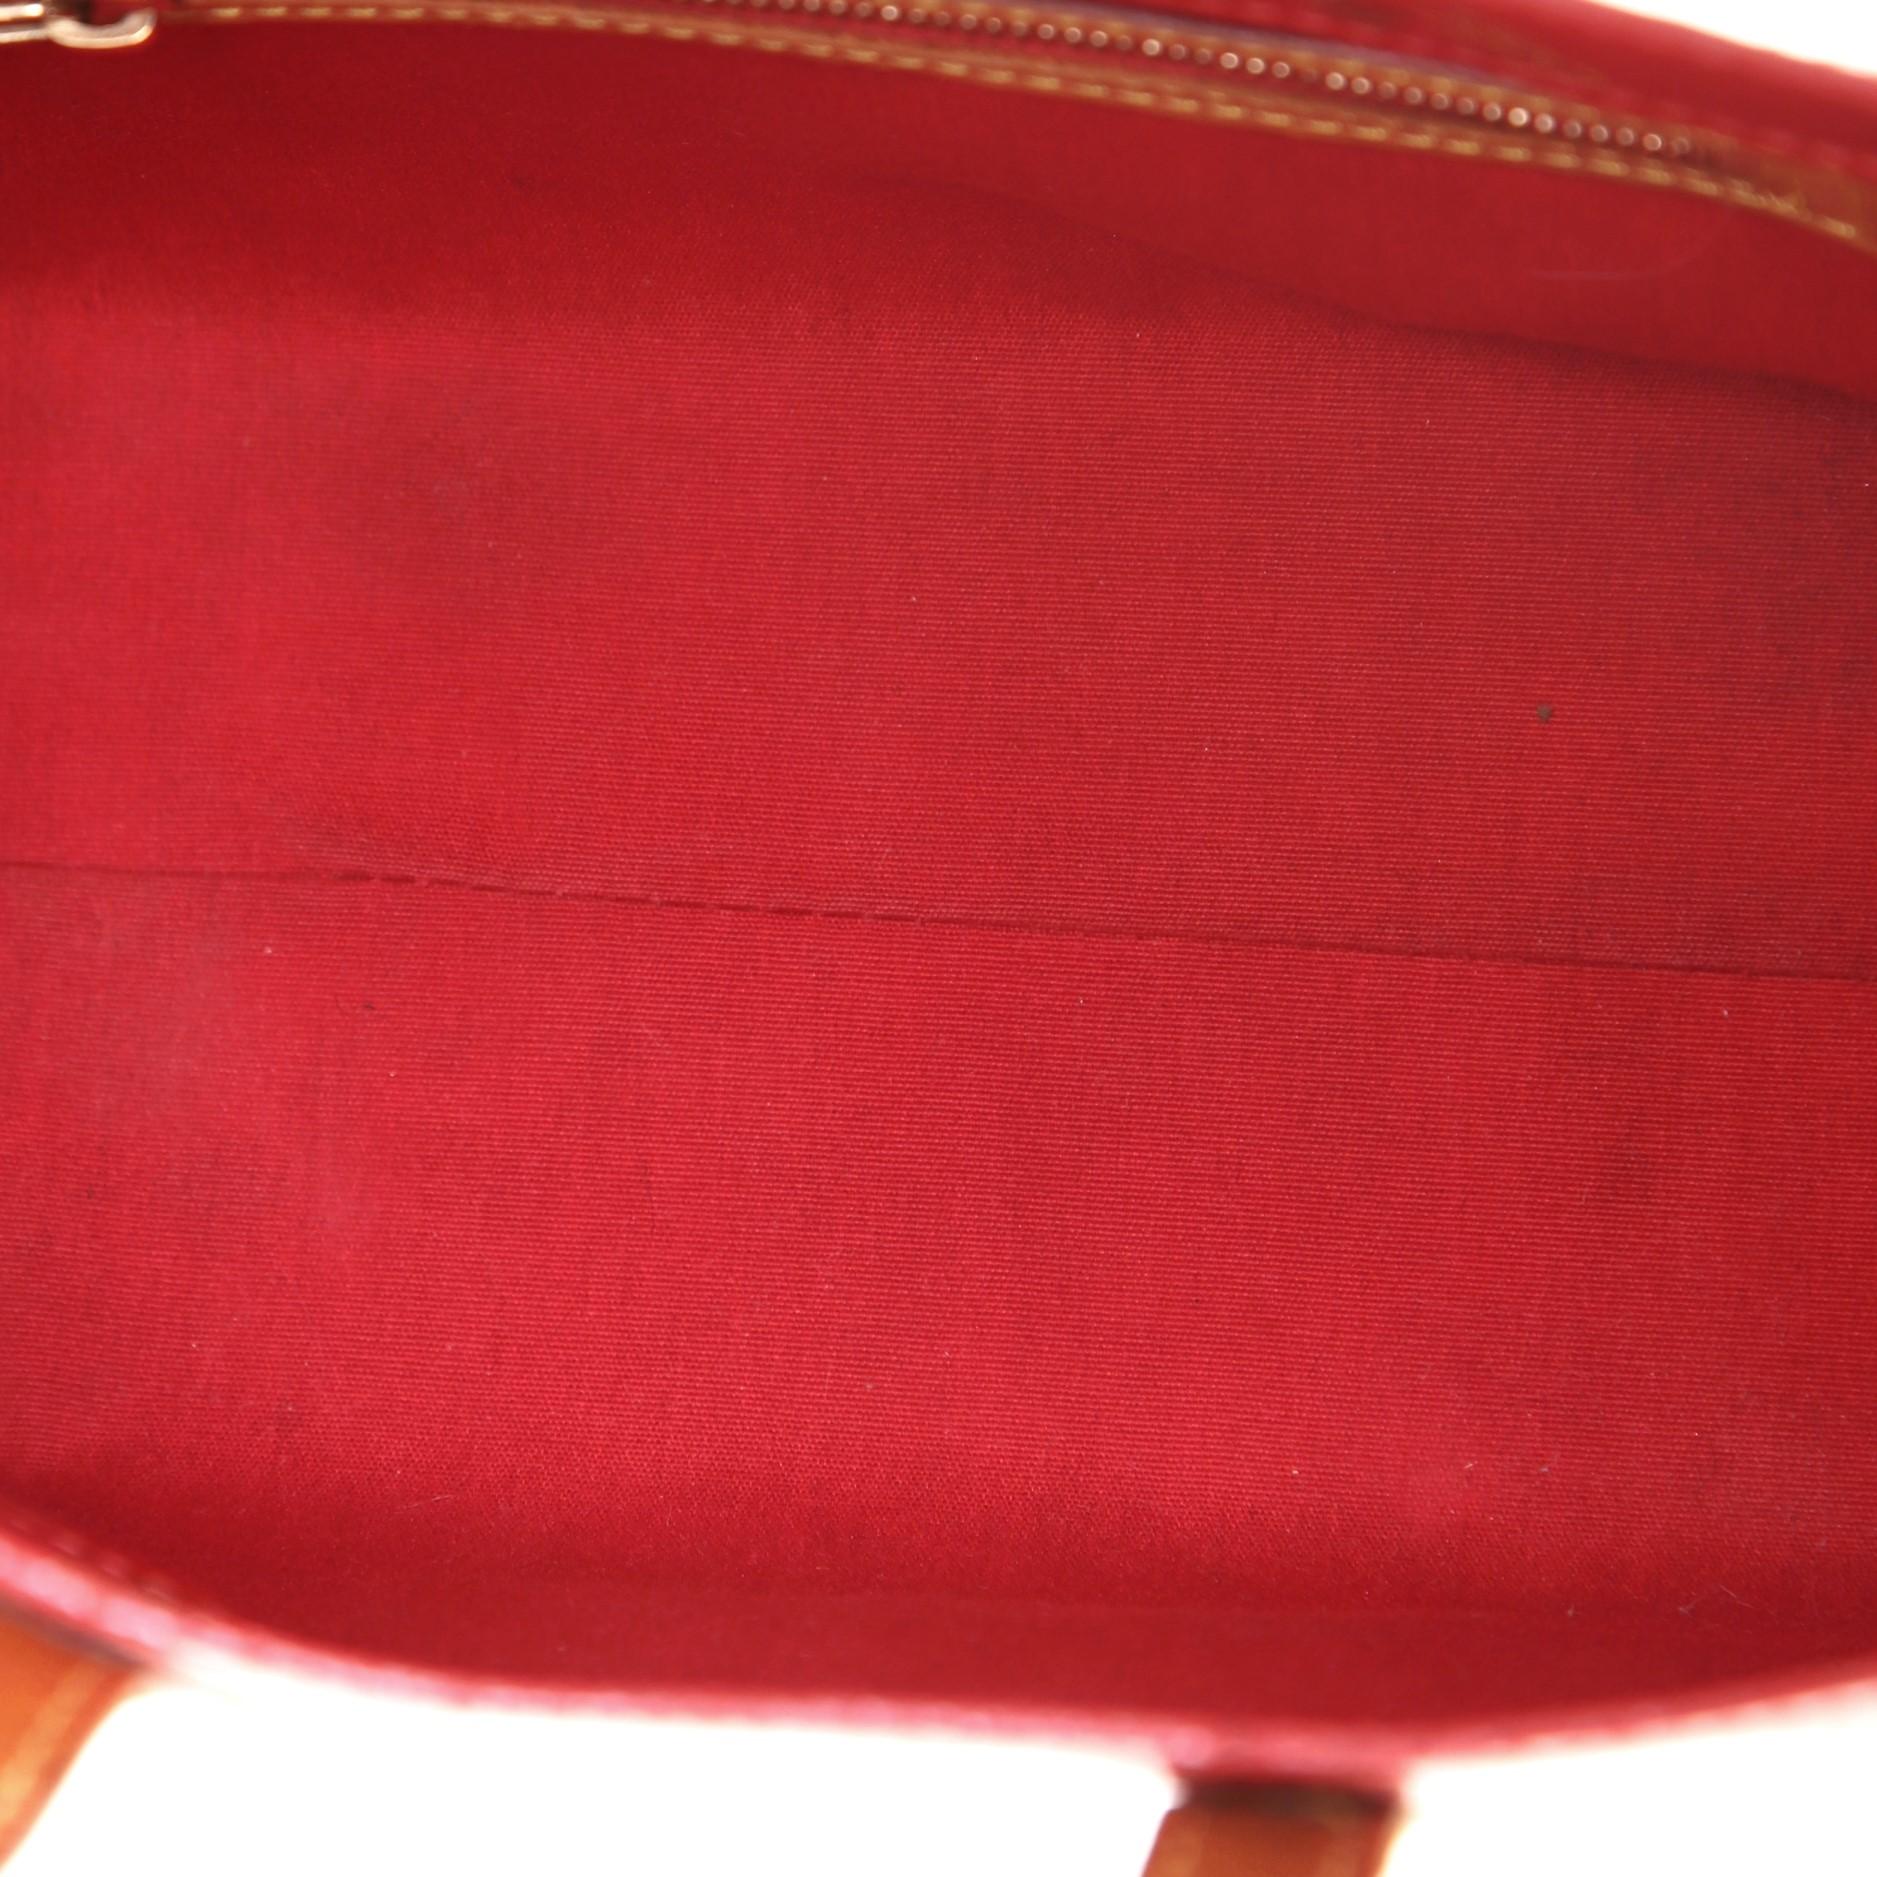 louis vuitton red and monogram bag